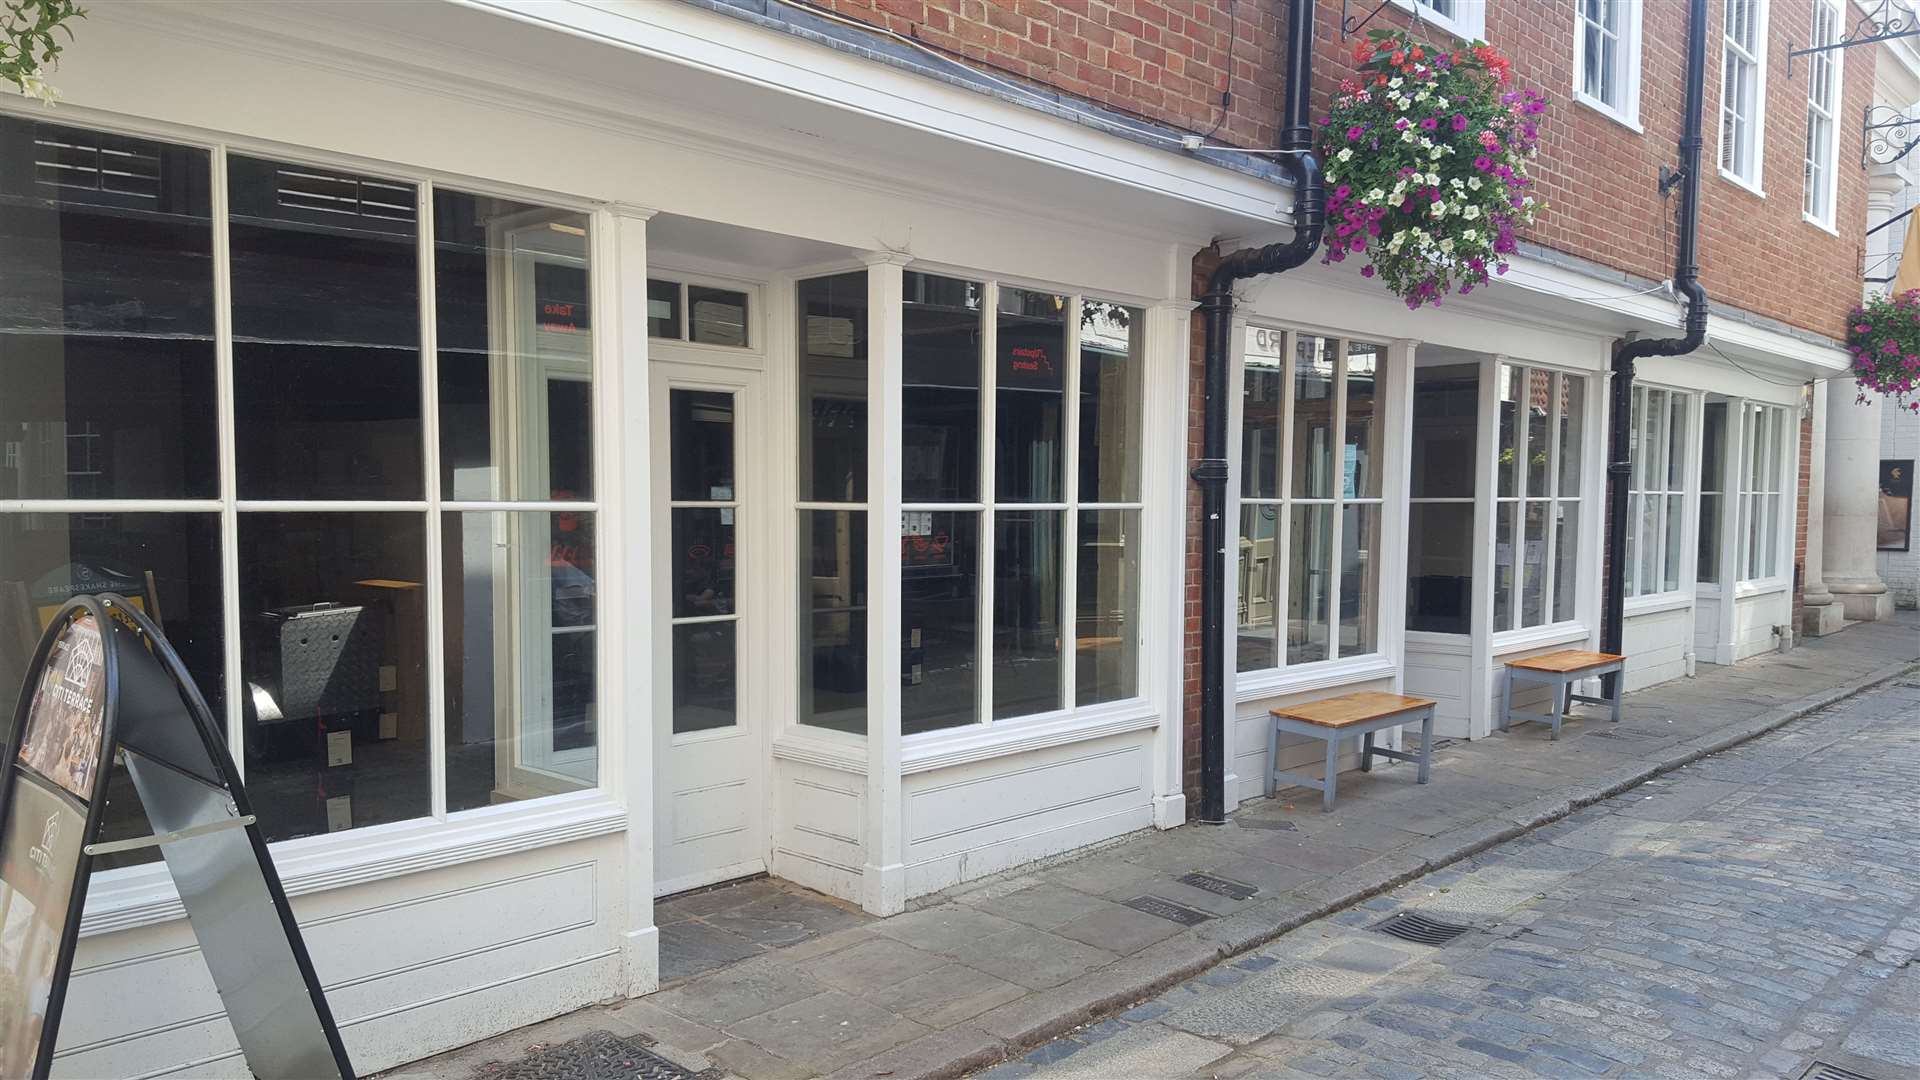 7Bone Burger is due to move into Butchery Lane